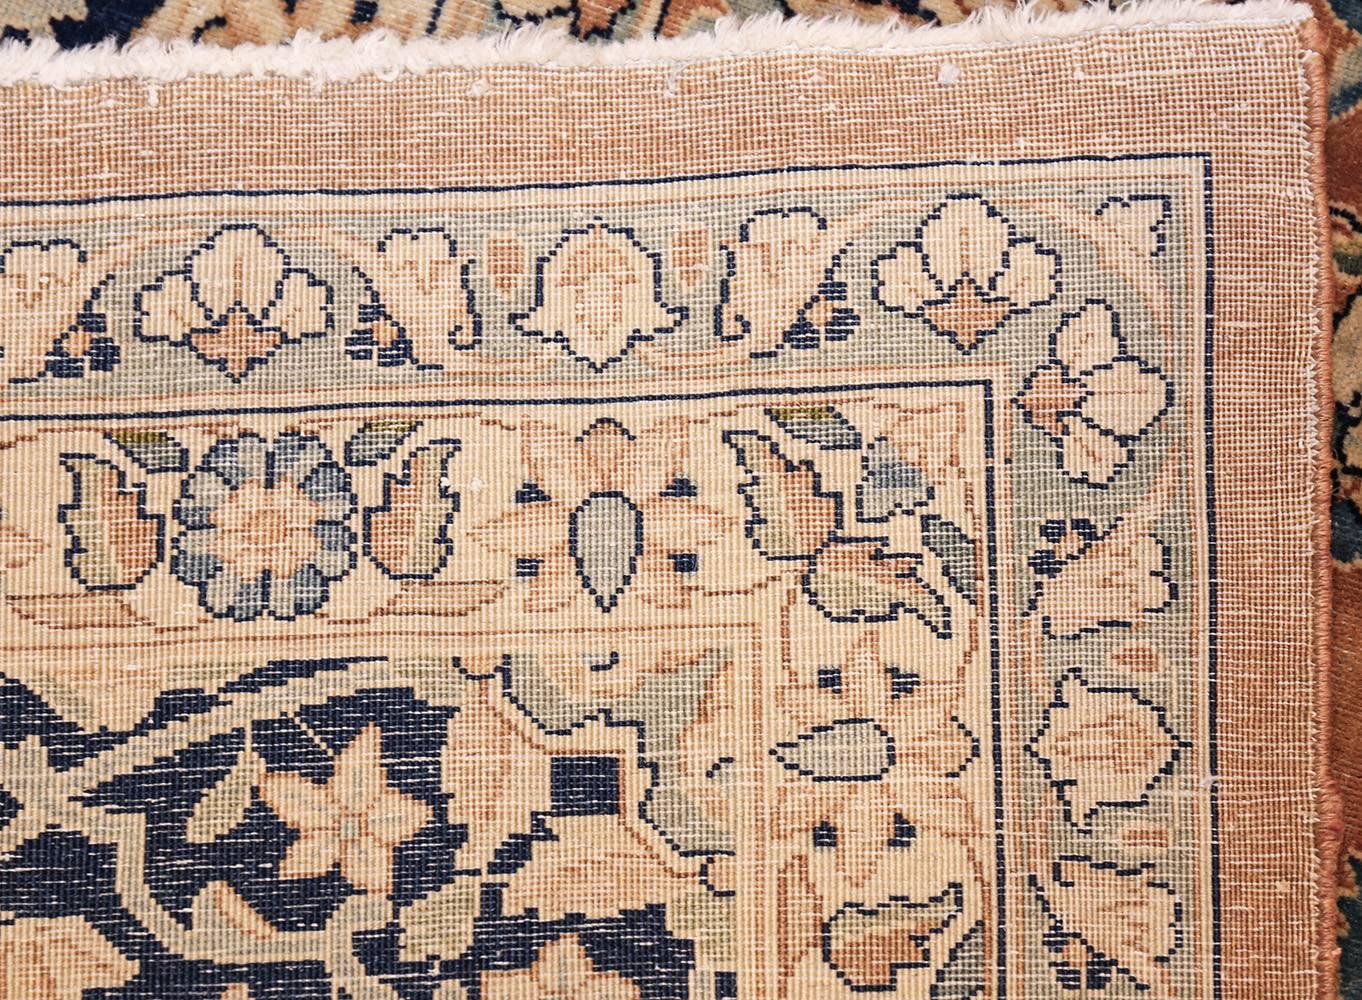 Antique Kerman carpet, country of origin: Persia, circa date: 1920— Complex lines and shapes define this beautiful Kerman carpet. With the softly flowing elements all tying into each other, their forms lead the viewer’s eye to the next captivating